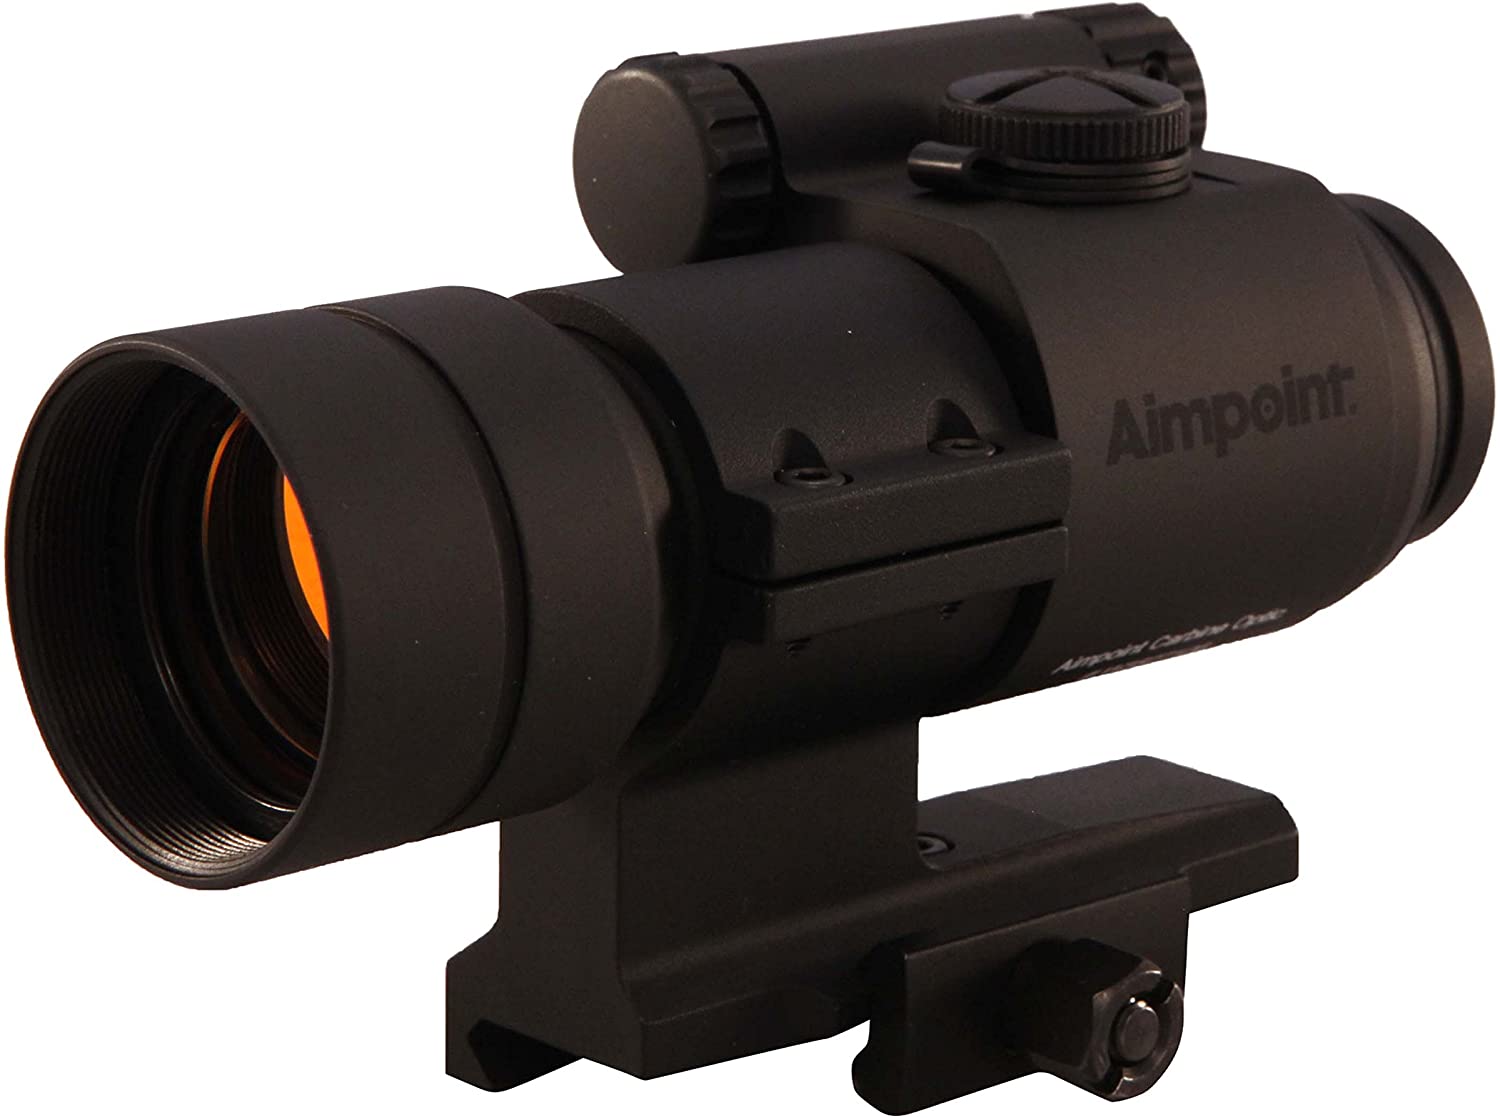  Aimpoint ACO Red Dot Reflex Sight with Mount